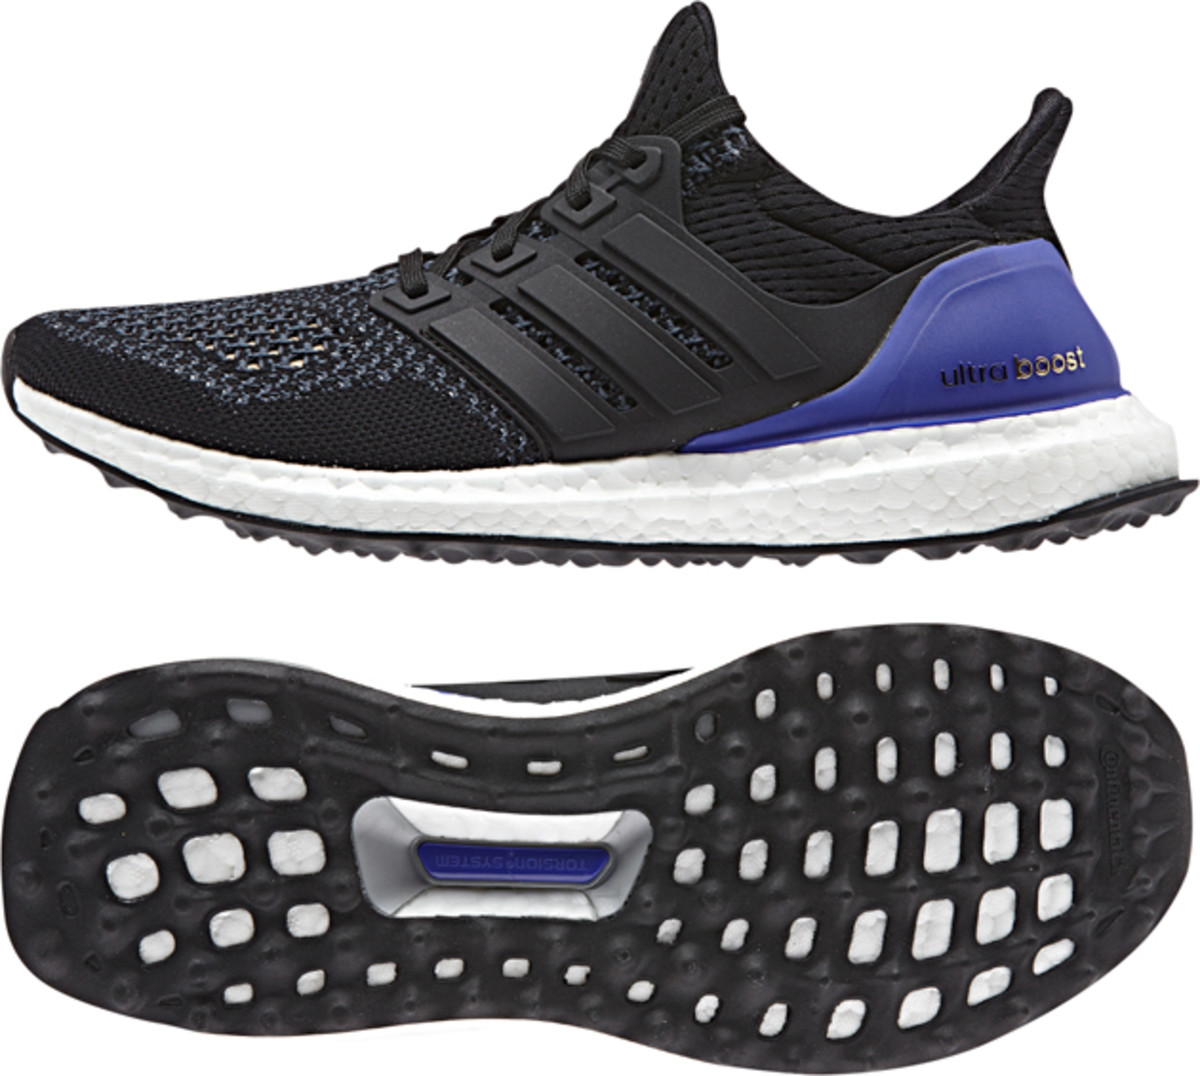 Adidas unveils Ultra Boost with latest running shoe technology - Sports ...